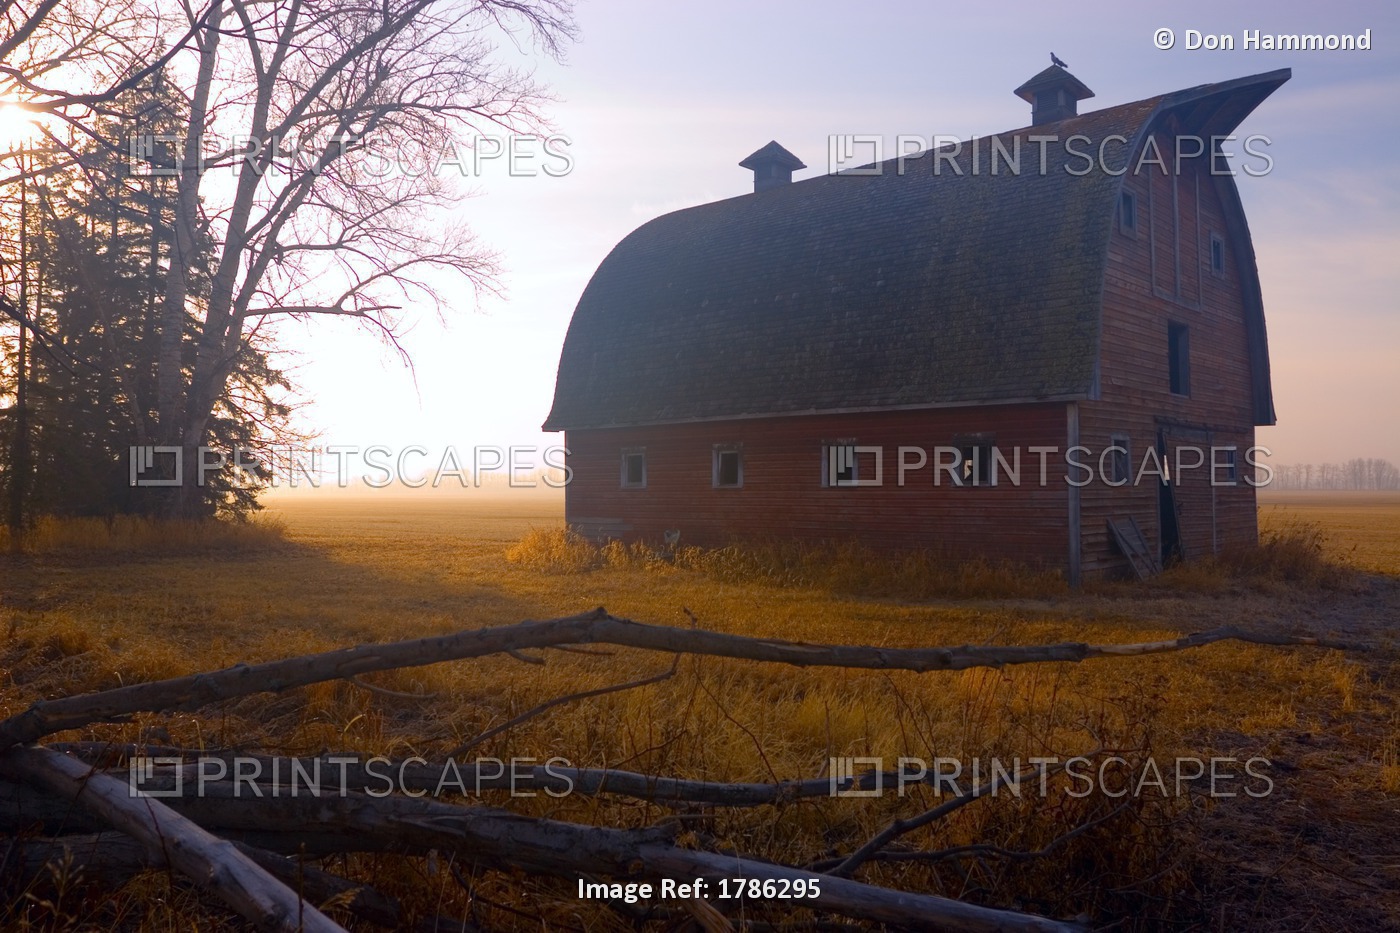 A Barn Sits In Morning Mist